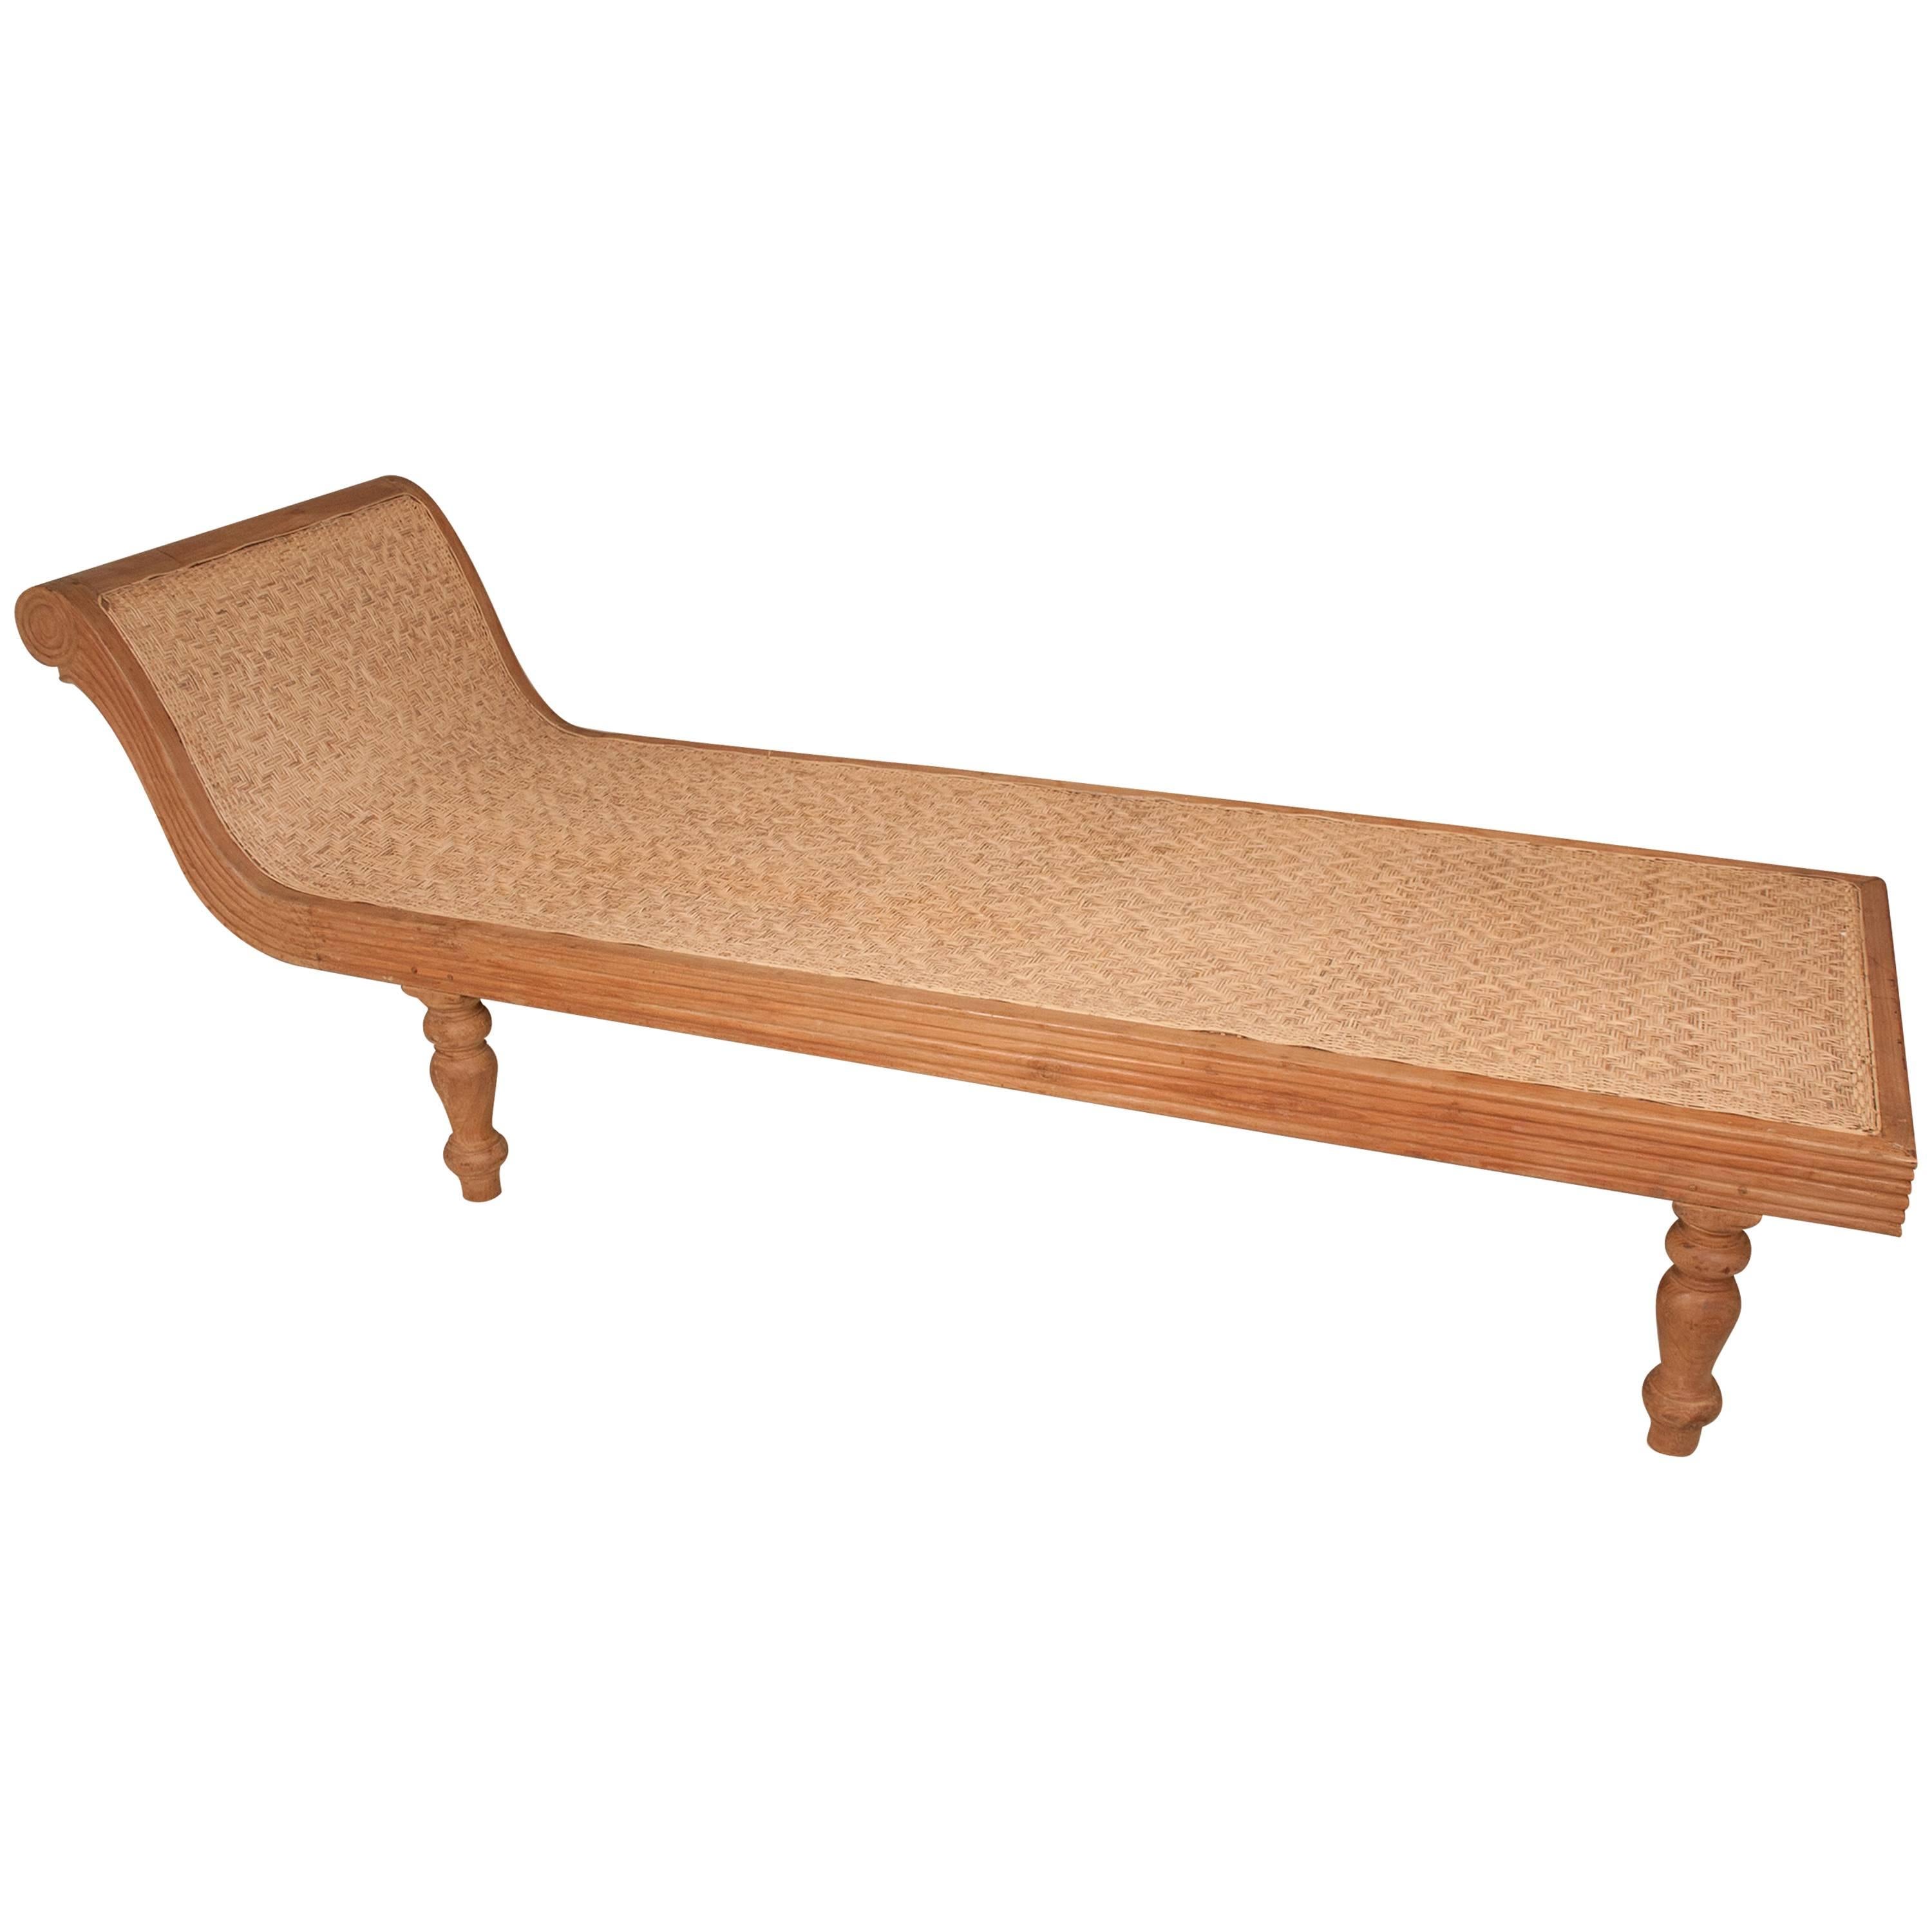 Caned Teak Wood Anglo-Indian Daybed 